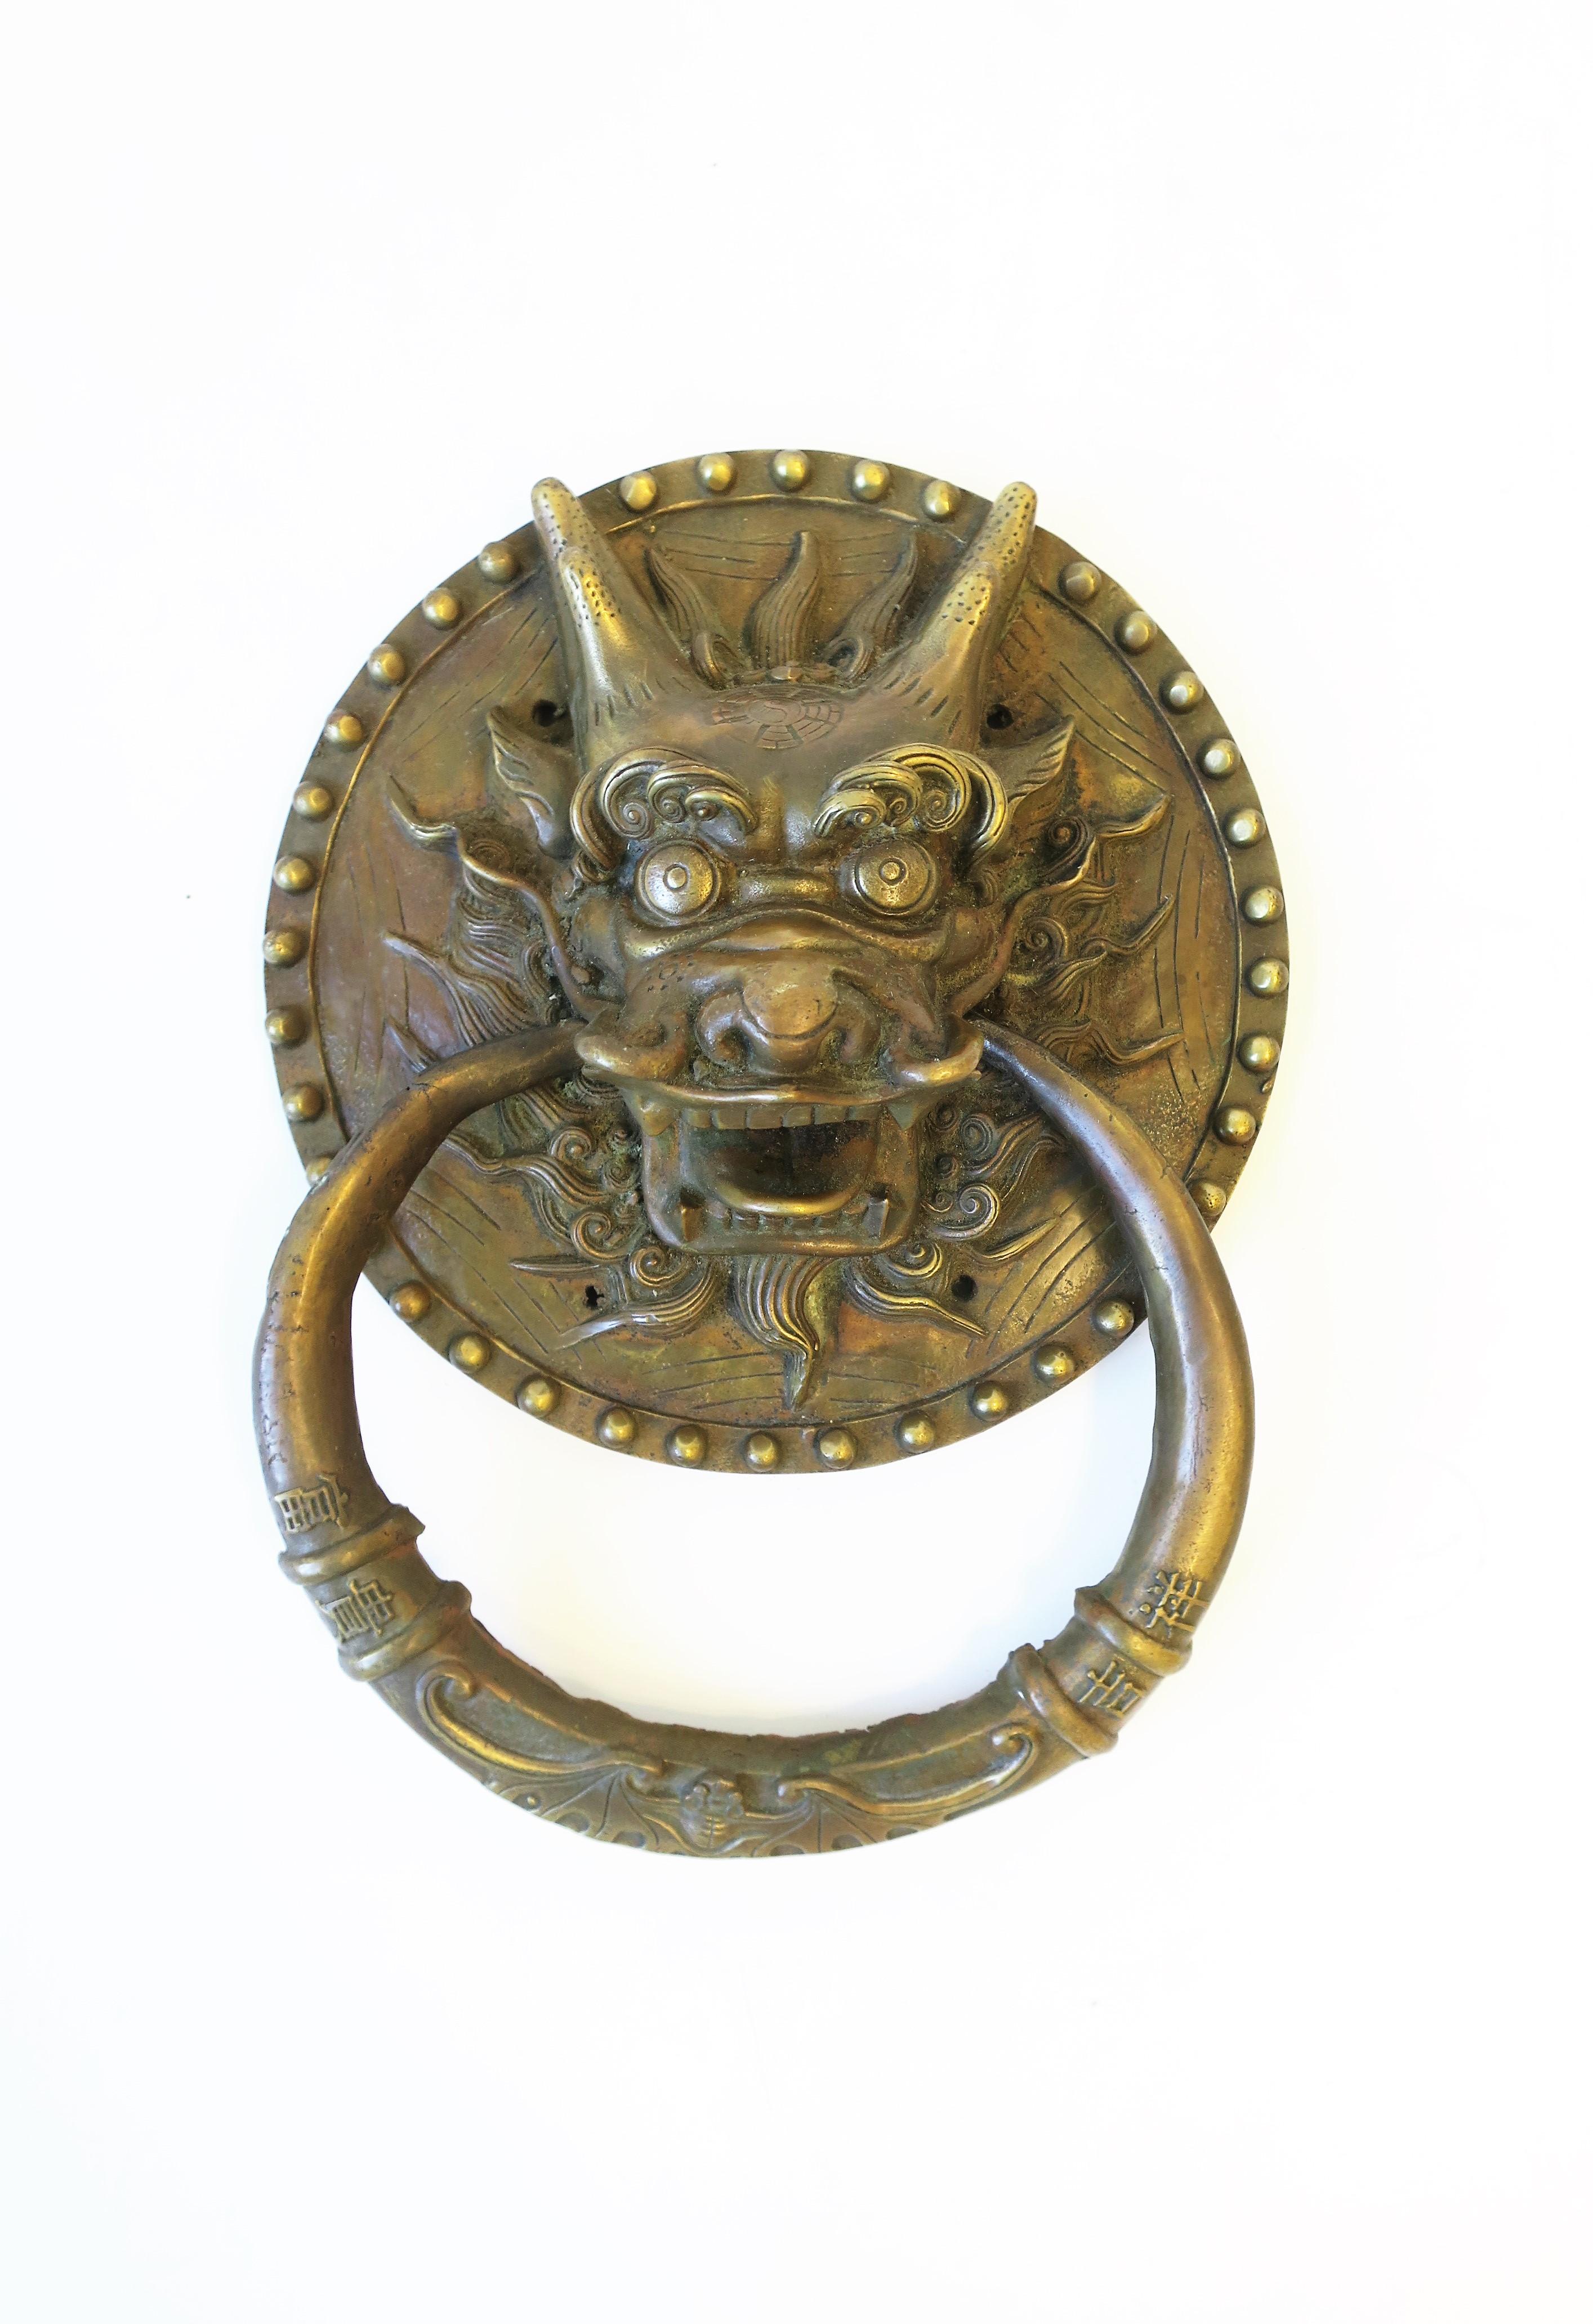 Foo DRAGON door knocker asian style solid very heavy cast brass hand made total length 20 cm 8 inch long banger fire